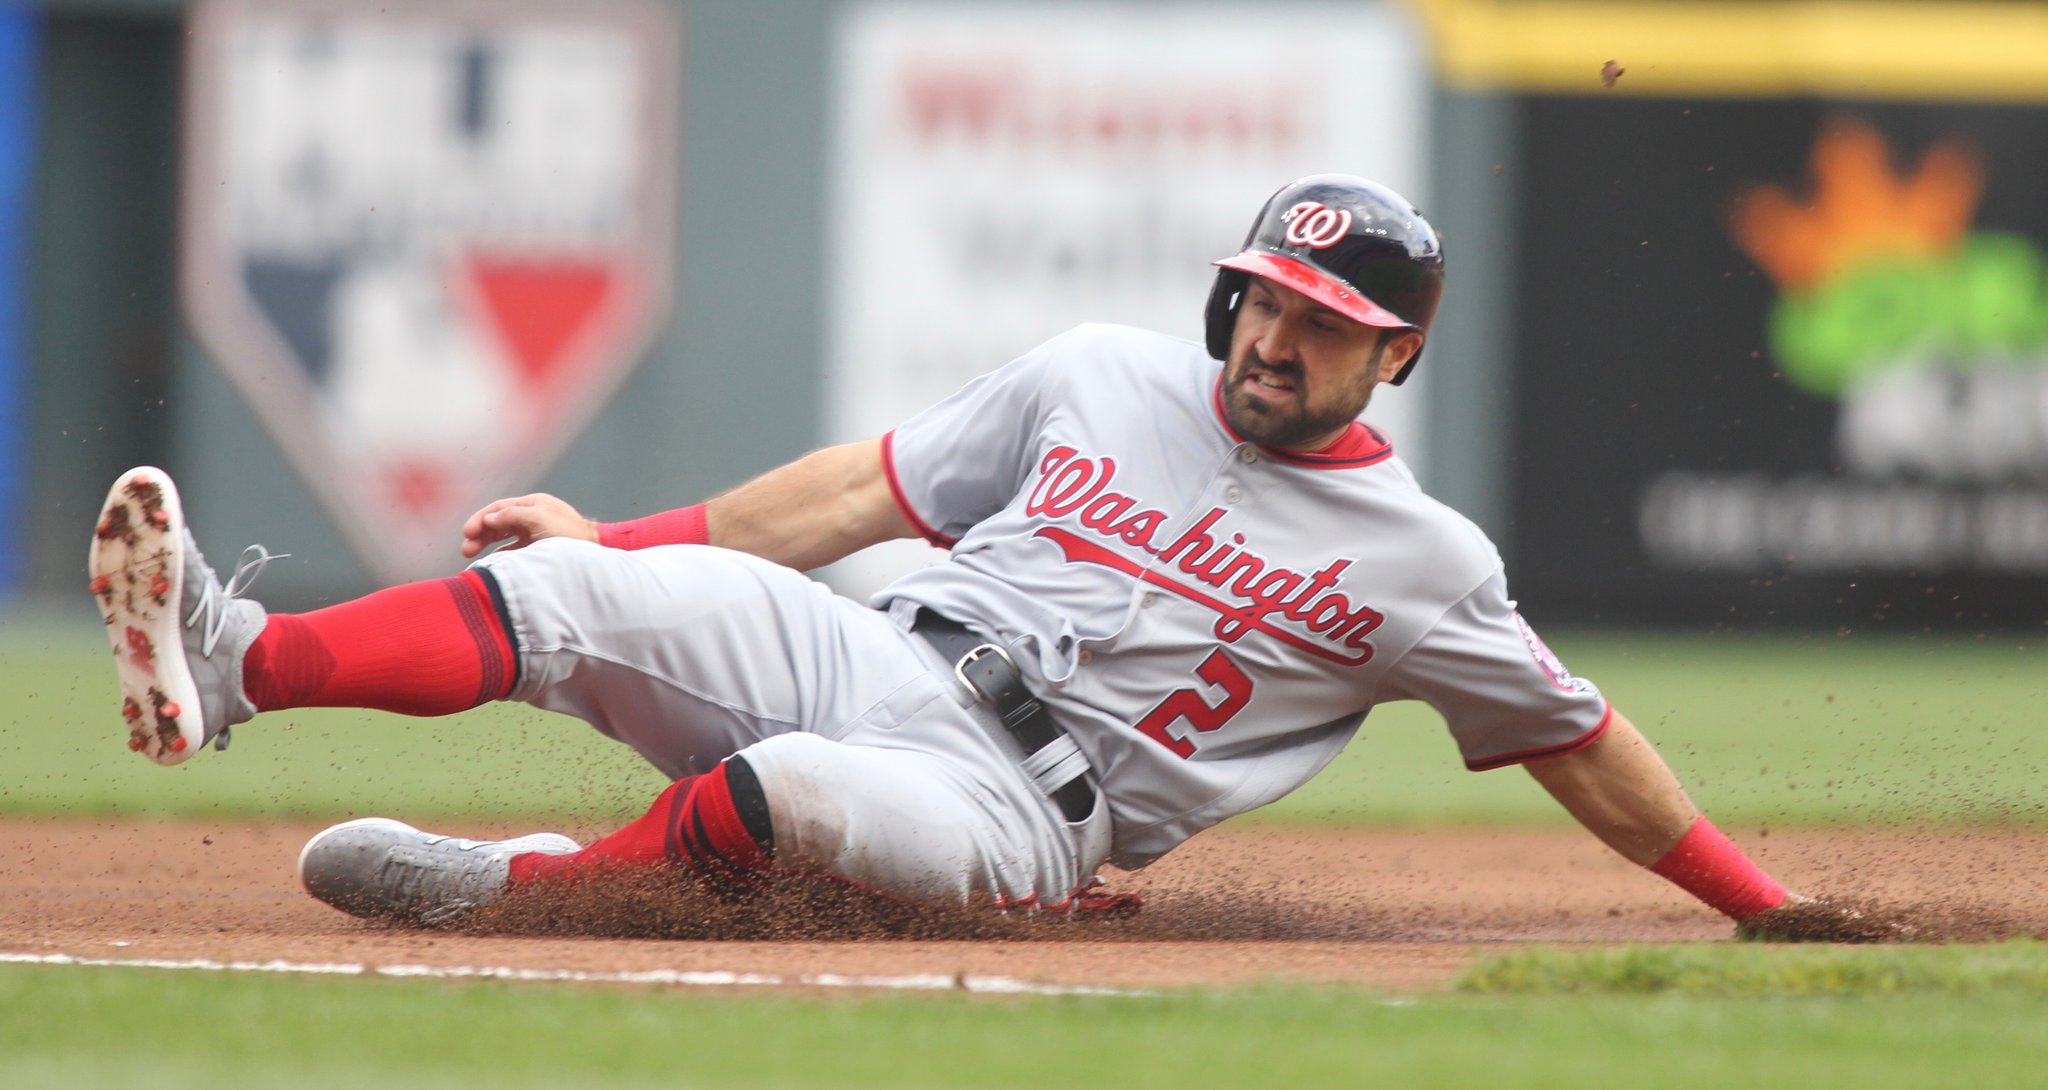 Adam Eaton confirms his playing career is over after 10 seasons in